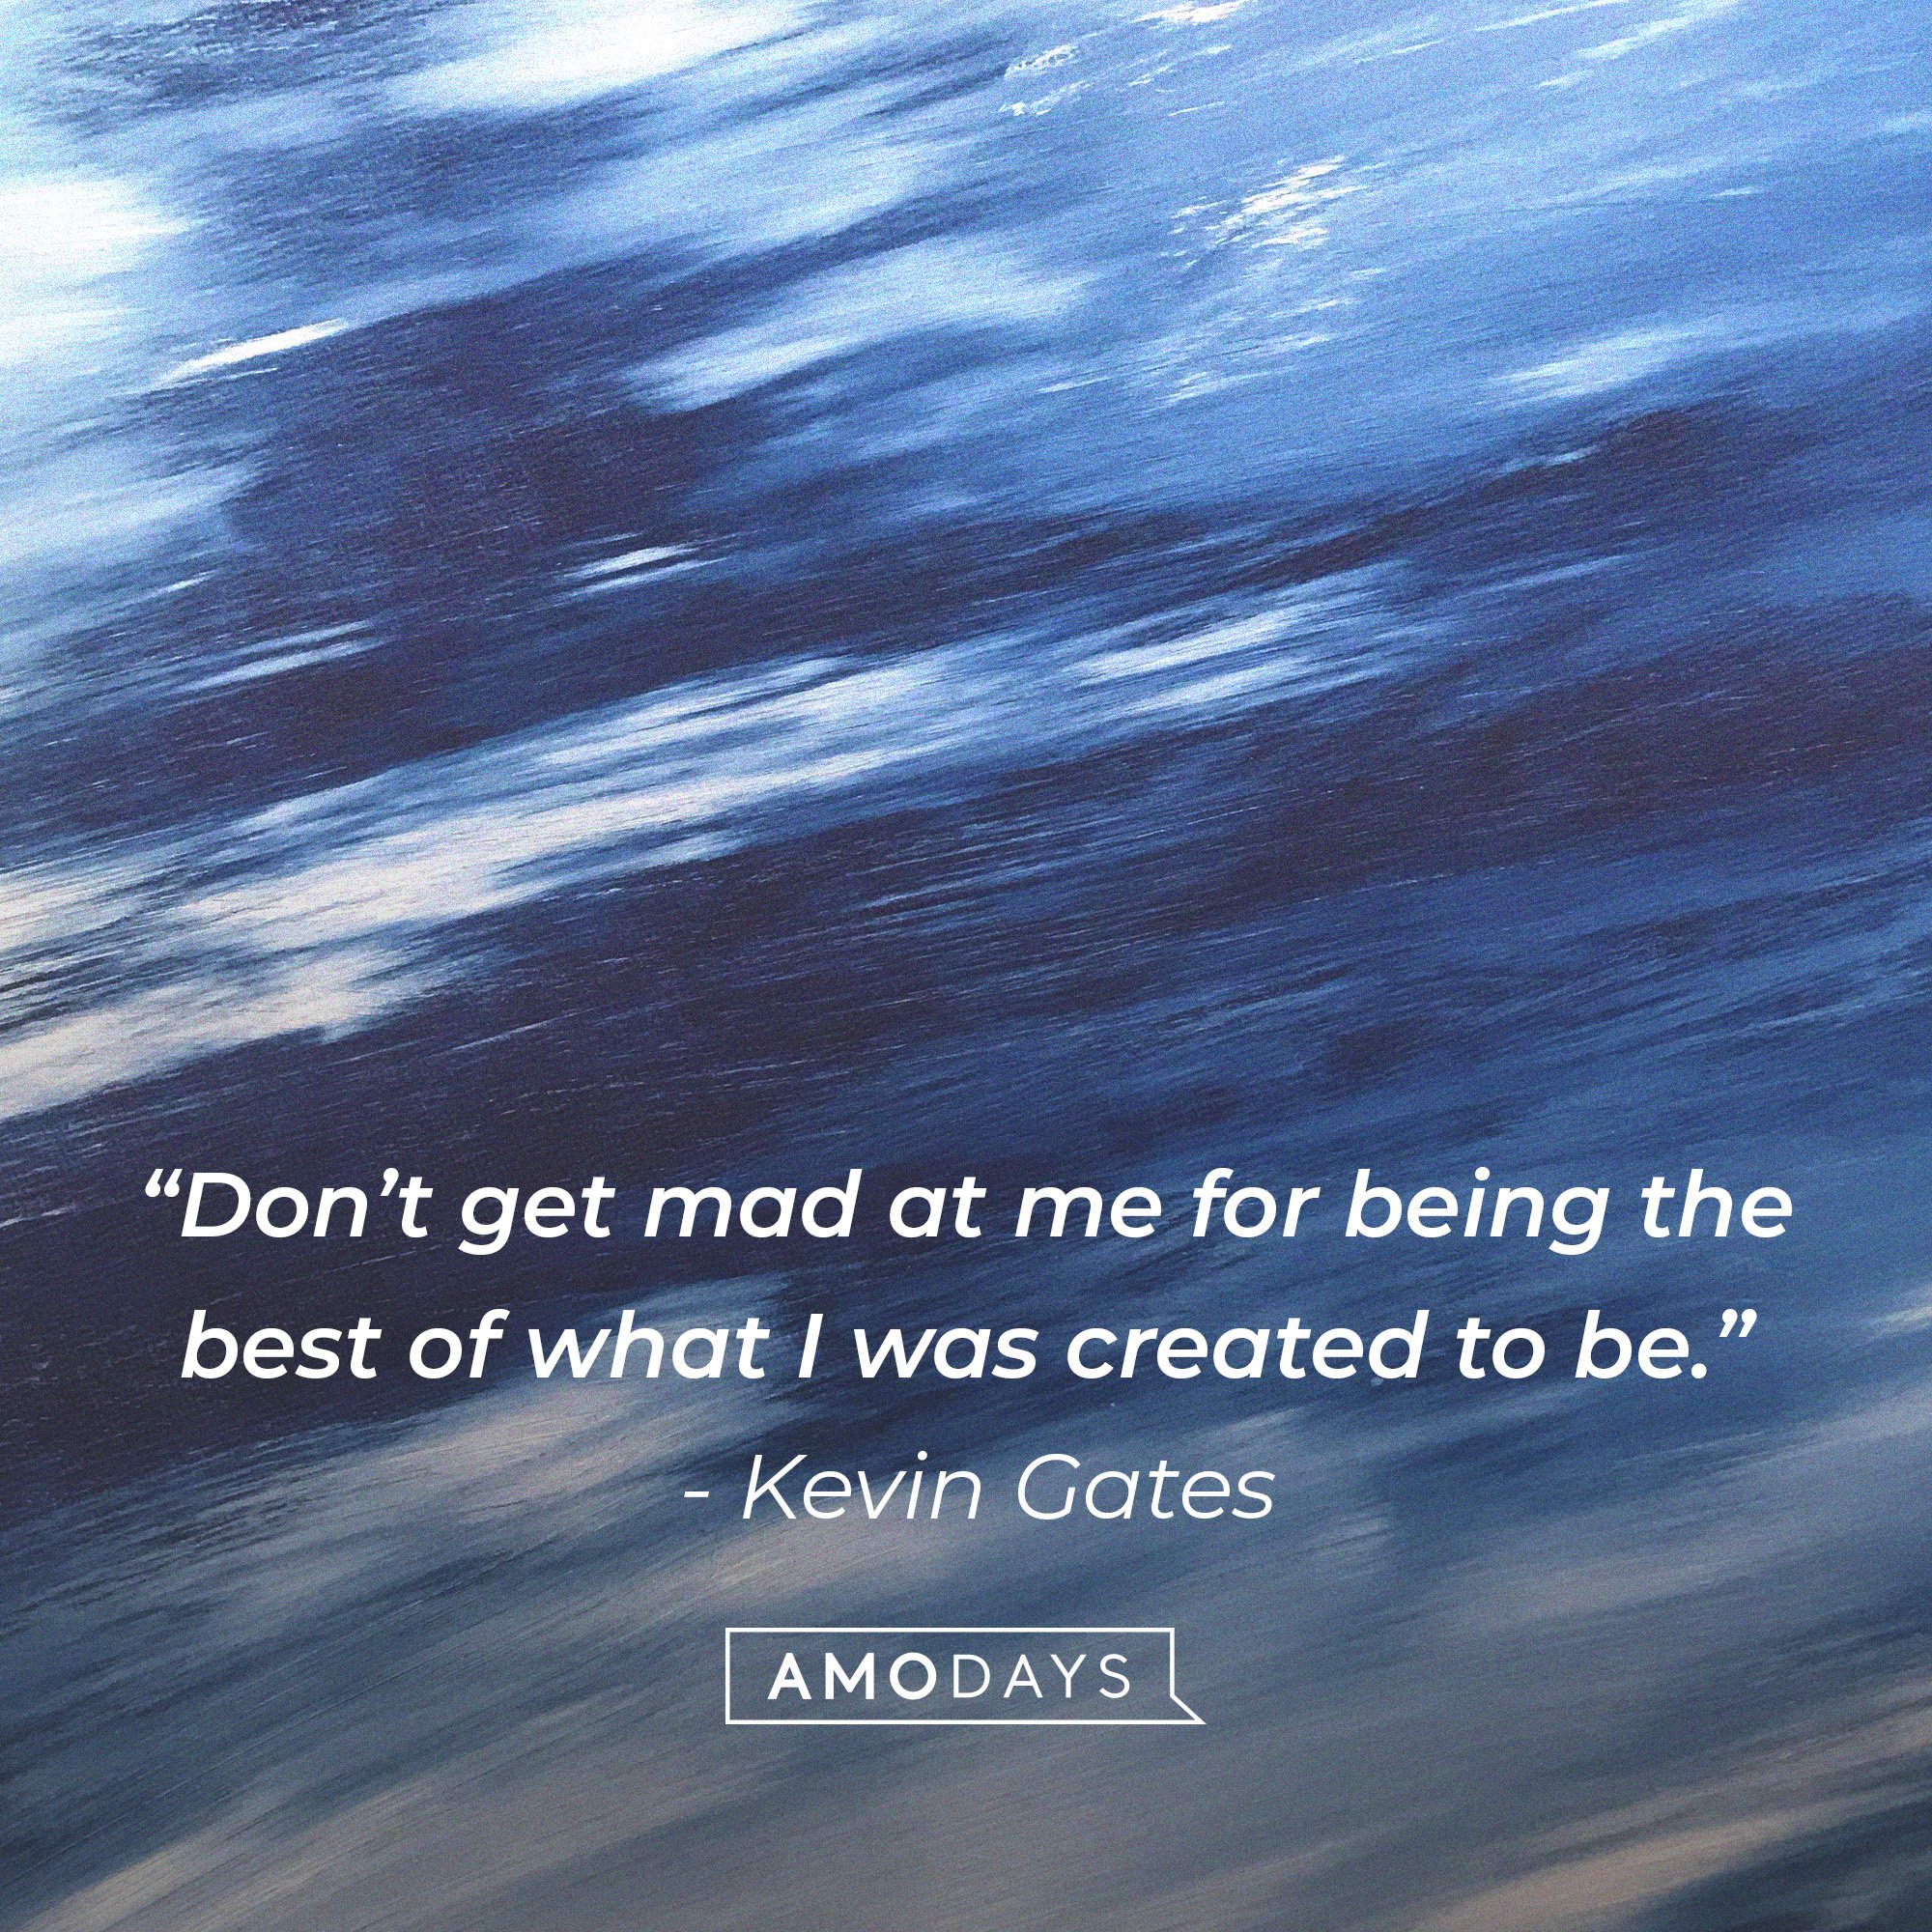 Kevin Gates’ quote: “Don’t get mad at me for being the best of what I was created to be.”  | Image: AmoDays